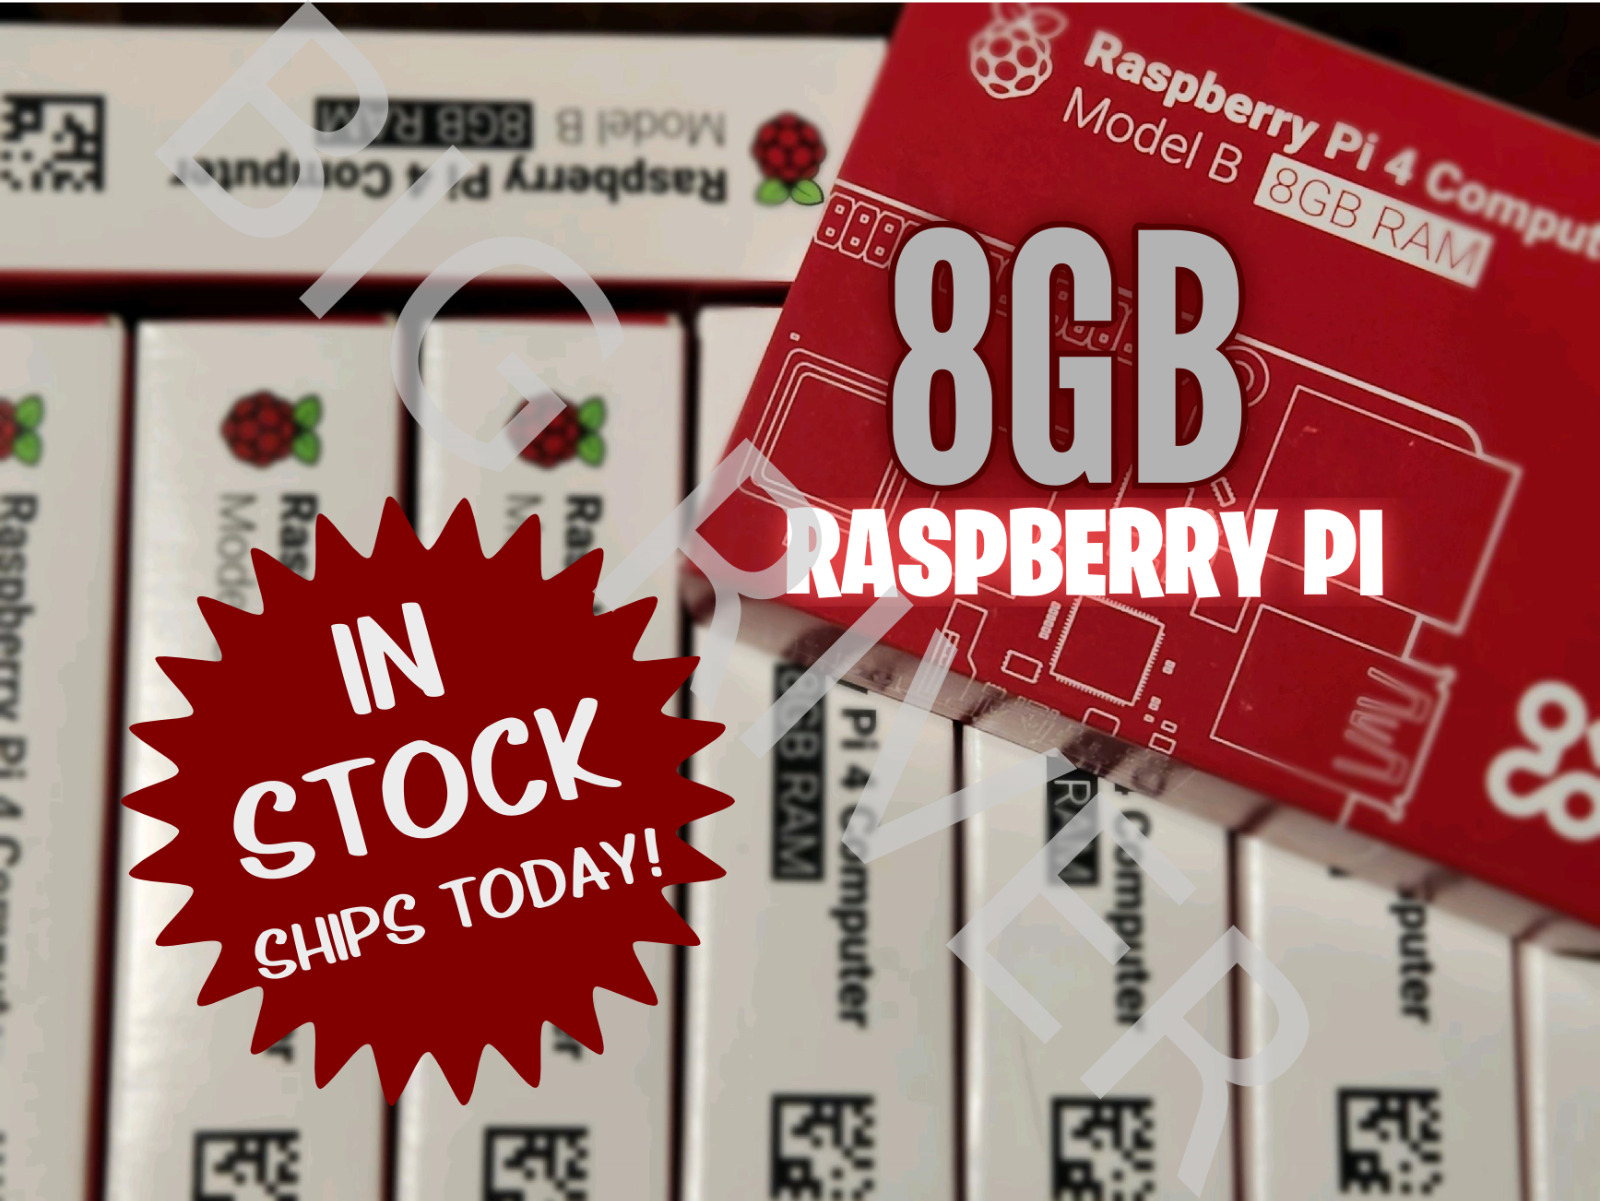 Raspberry Pi 4 Model B 8GB RAM Quad core 64-bit 1.5GHz - SHIP TODAY!. Available Now for 195.00